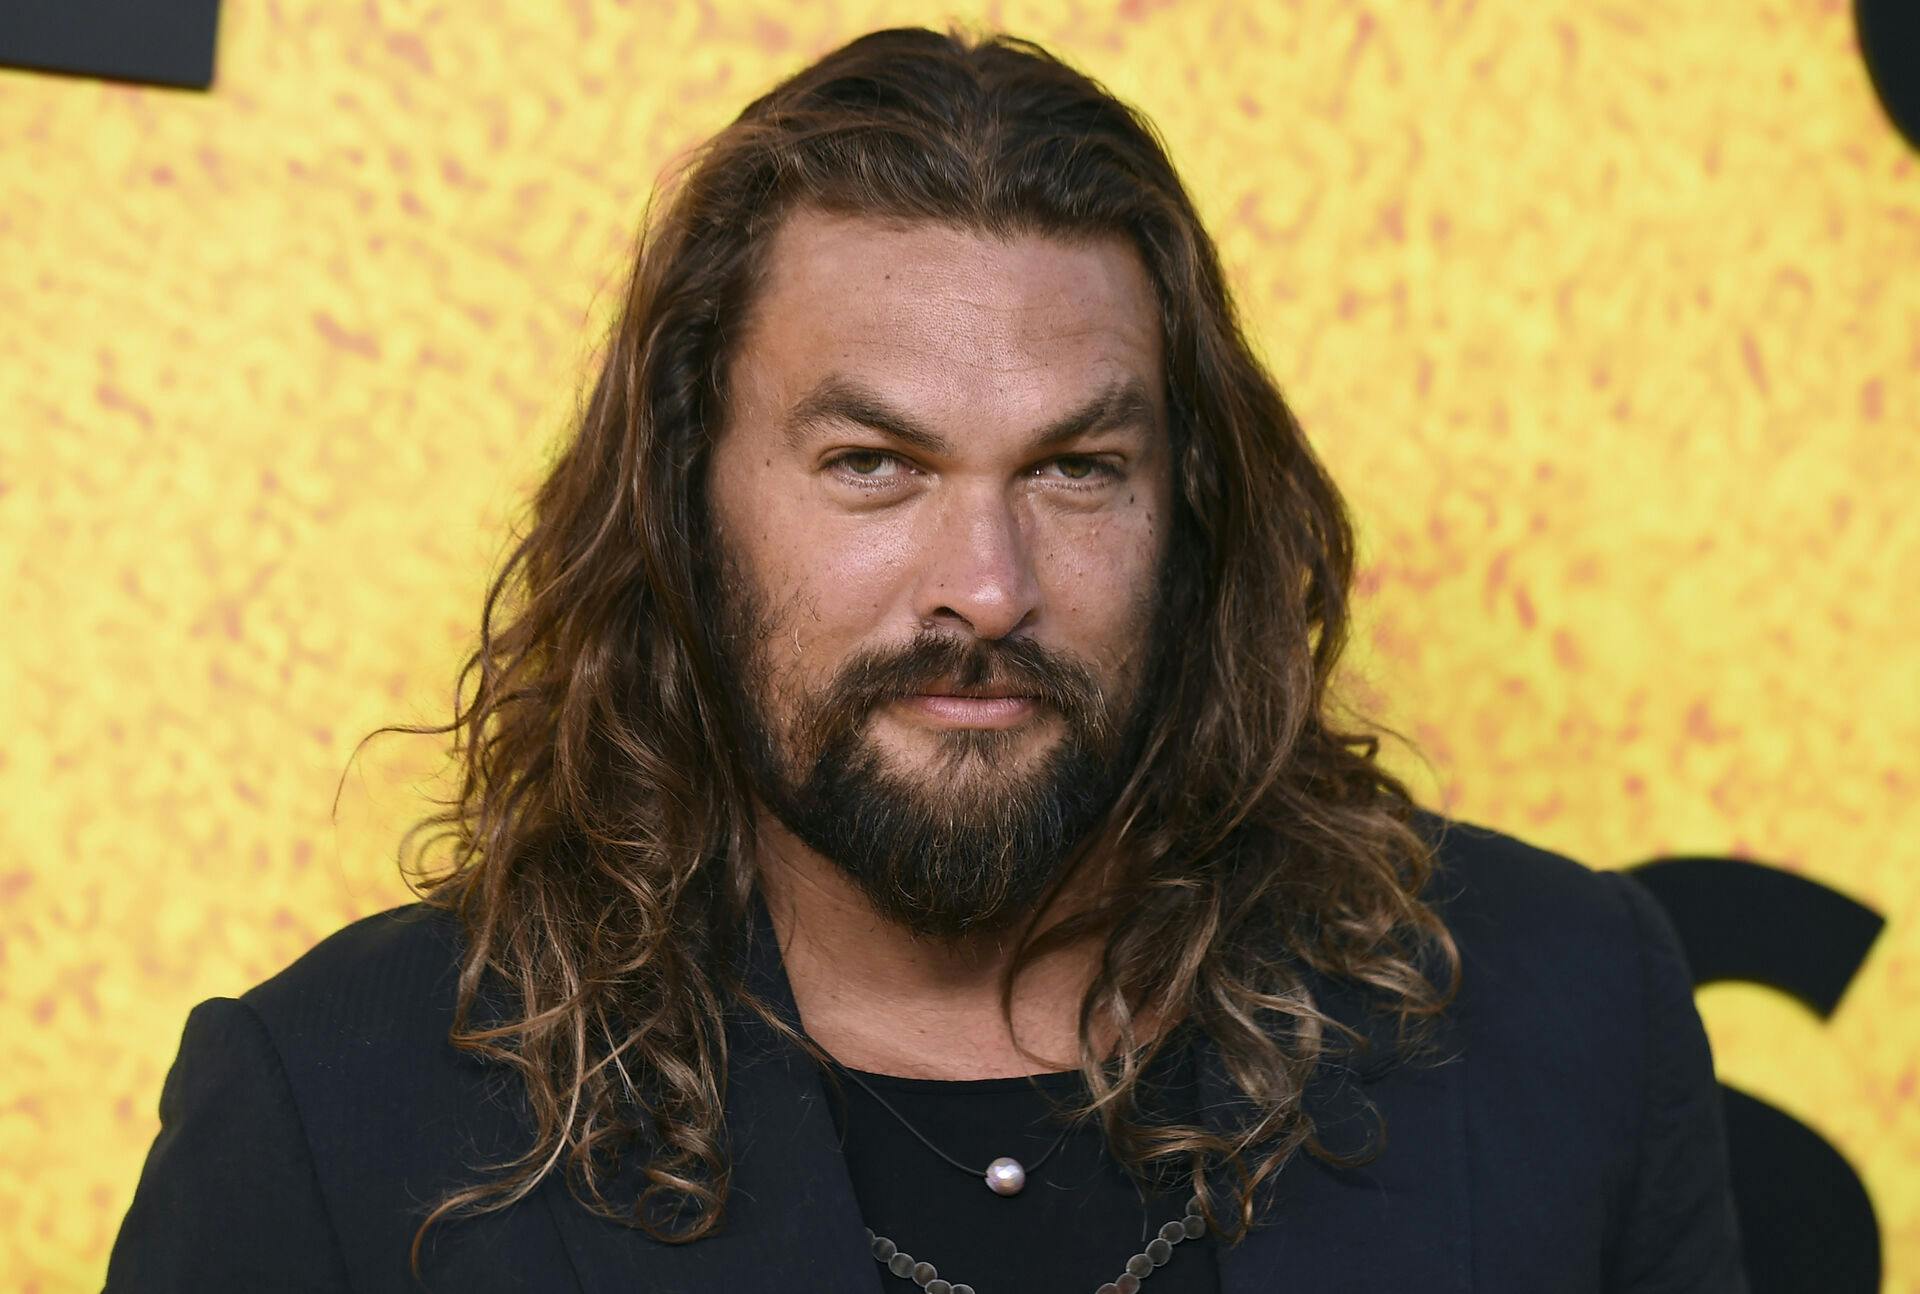 Jason Momoa arrives at the premiere of third season of "See, " Tuesday, Aug. 23, 2022, at DGA Theatre in Los Angeles. (Photo by Jordan Strauss/Invision/AP)